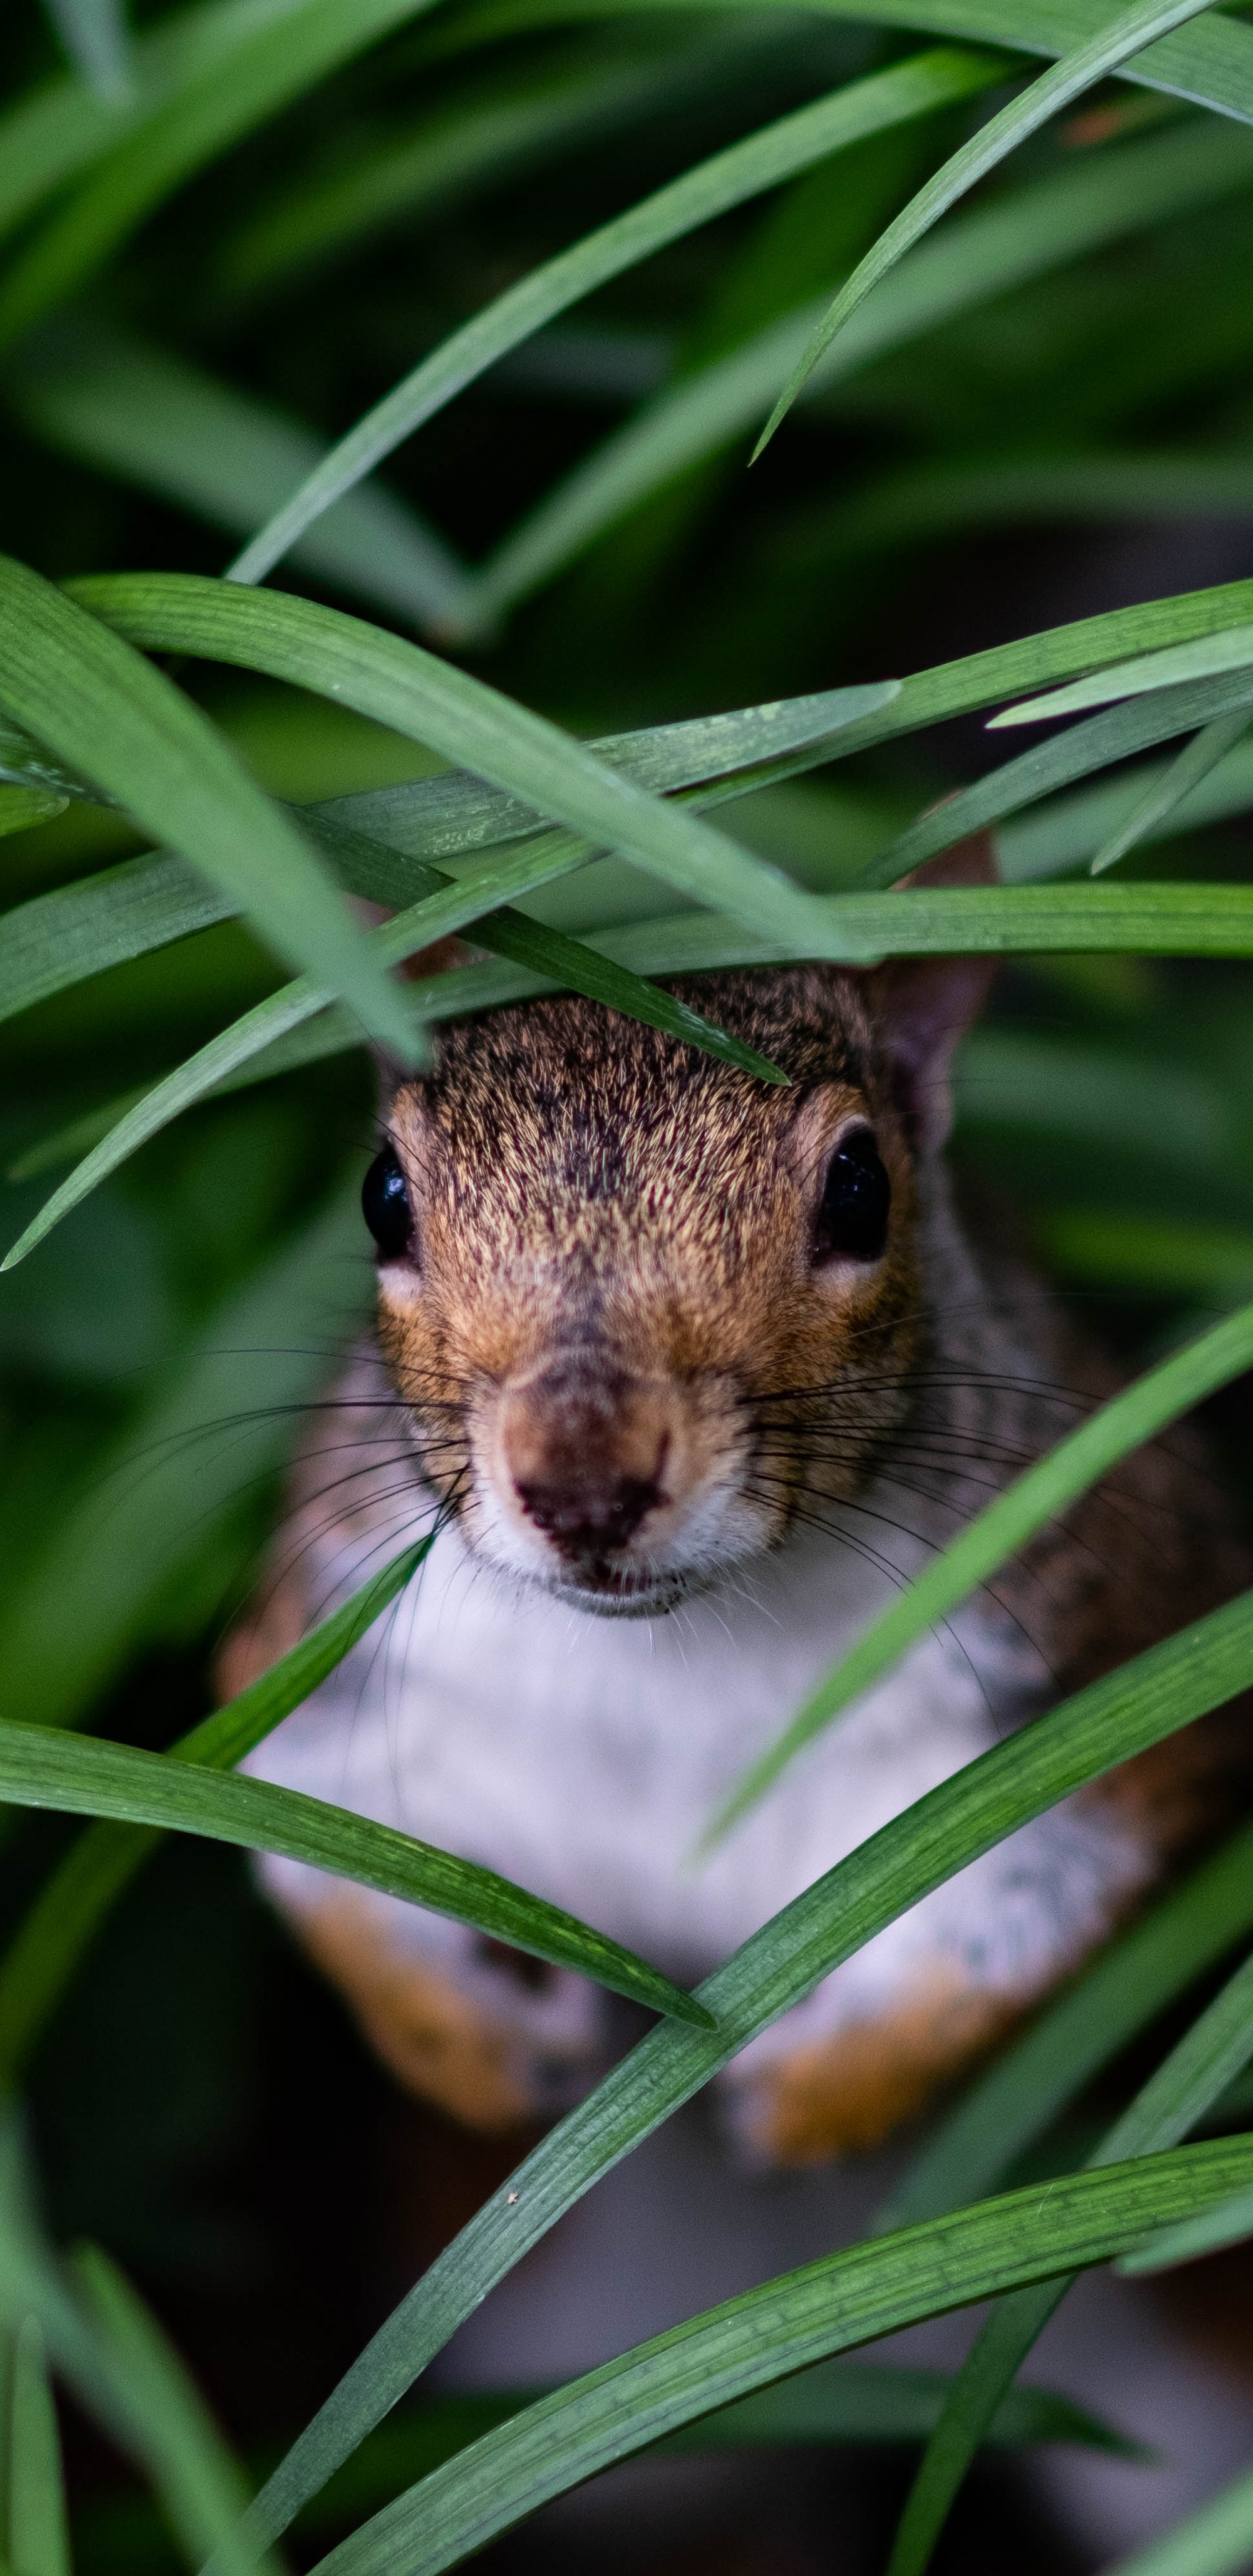 Brown and White Squirrel on Green Grass During Daytime. Wallpaper in 1440x2960 Resolution